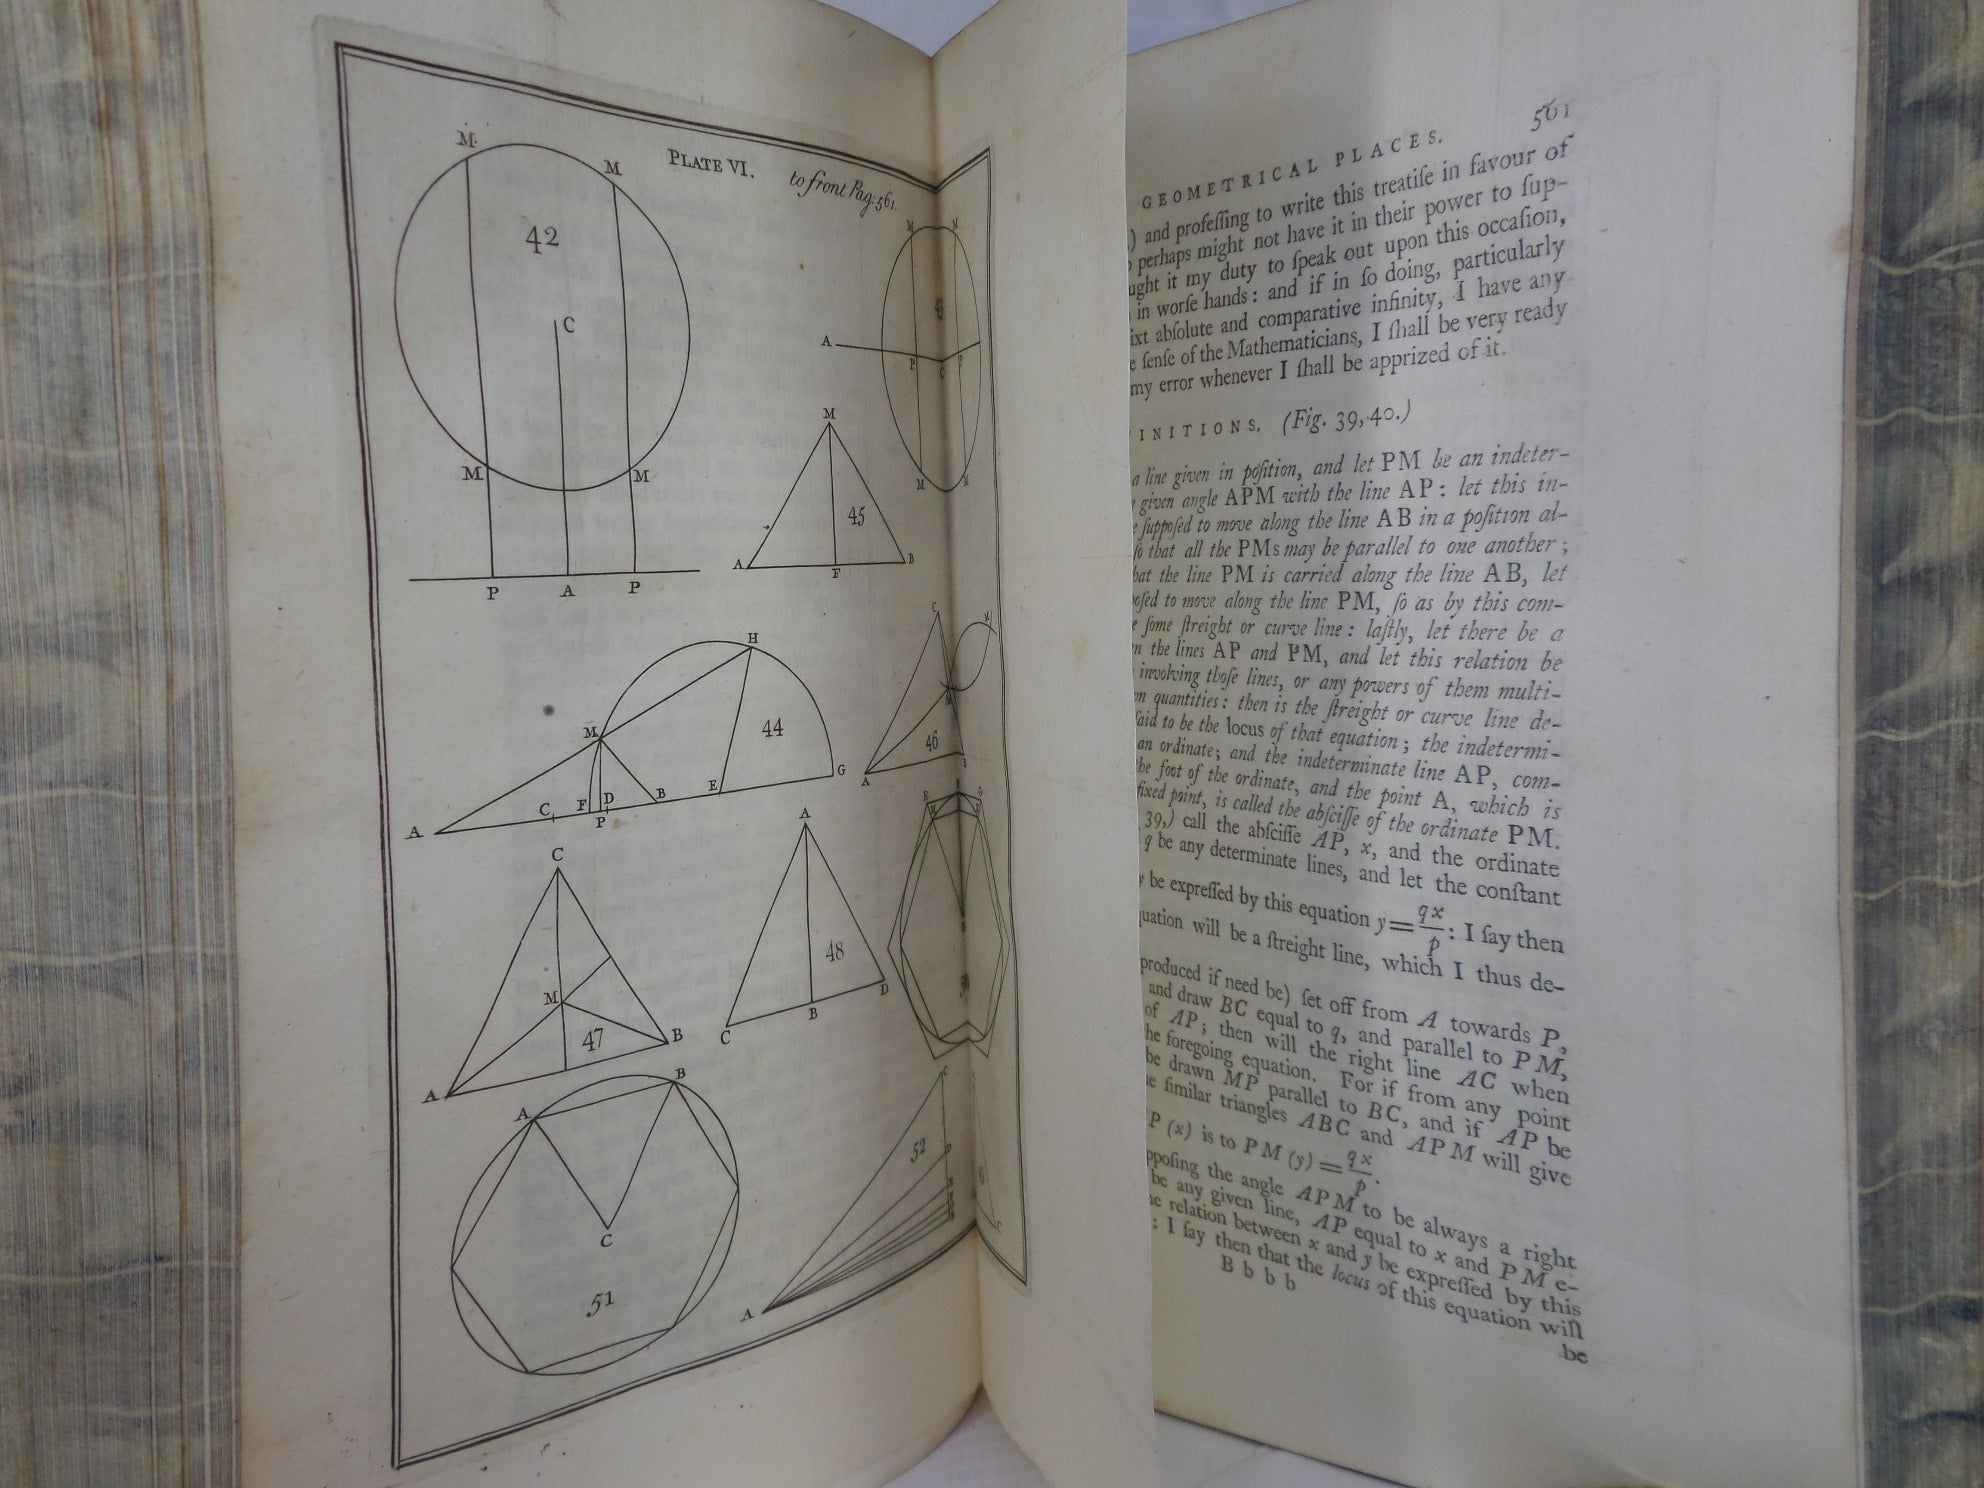 THE ELEMENTS OF ALGEBRA BY NICHOLAS SAUNDERSON 1740 LEATHER BOUND IN TWO VOLUMES